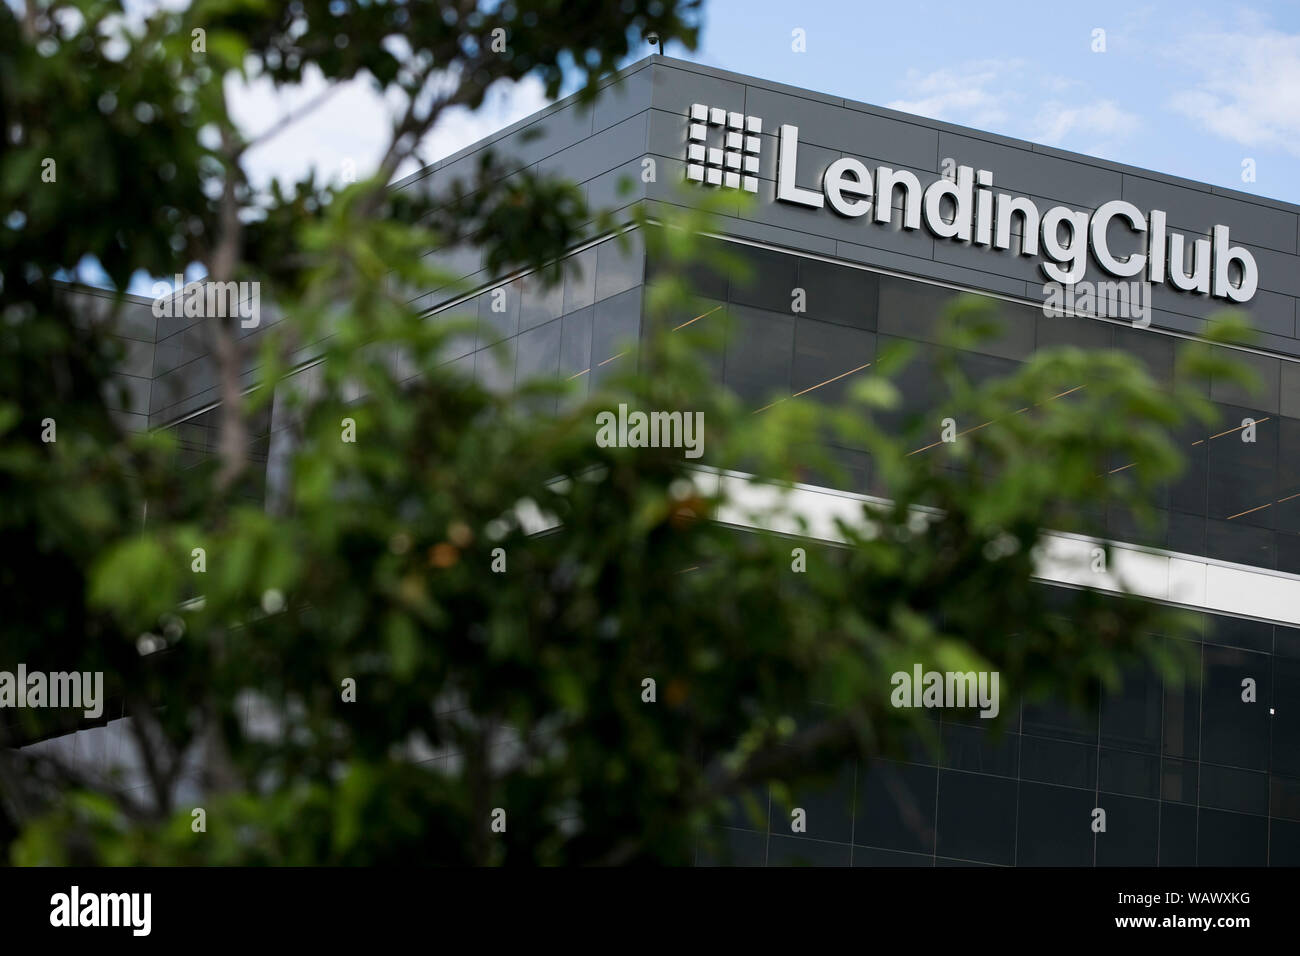 A logo sign outside of a facility occupied by Lending Club in Lehi, Utah on July 27, 2019. Stock Photo